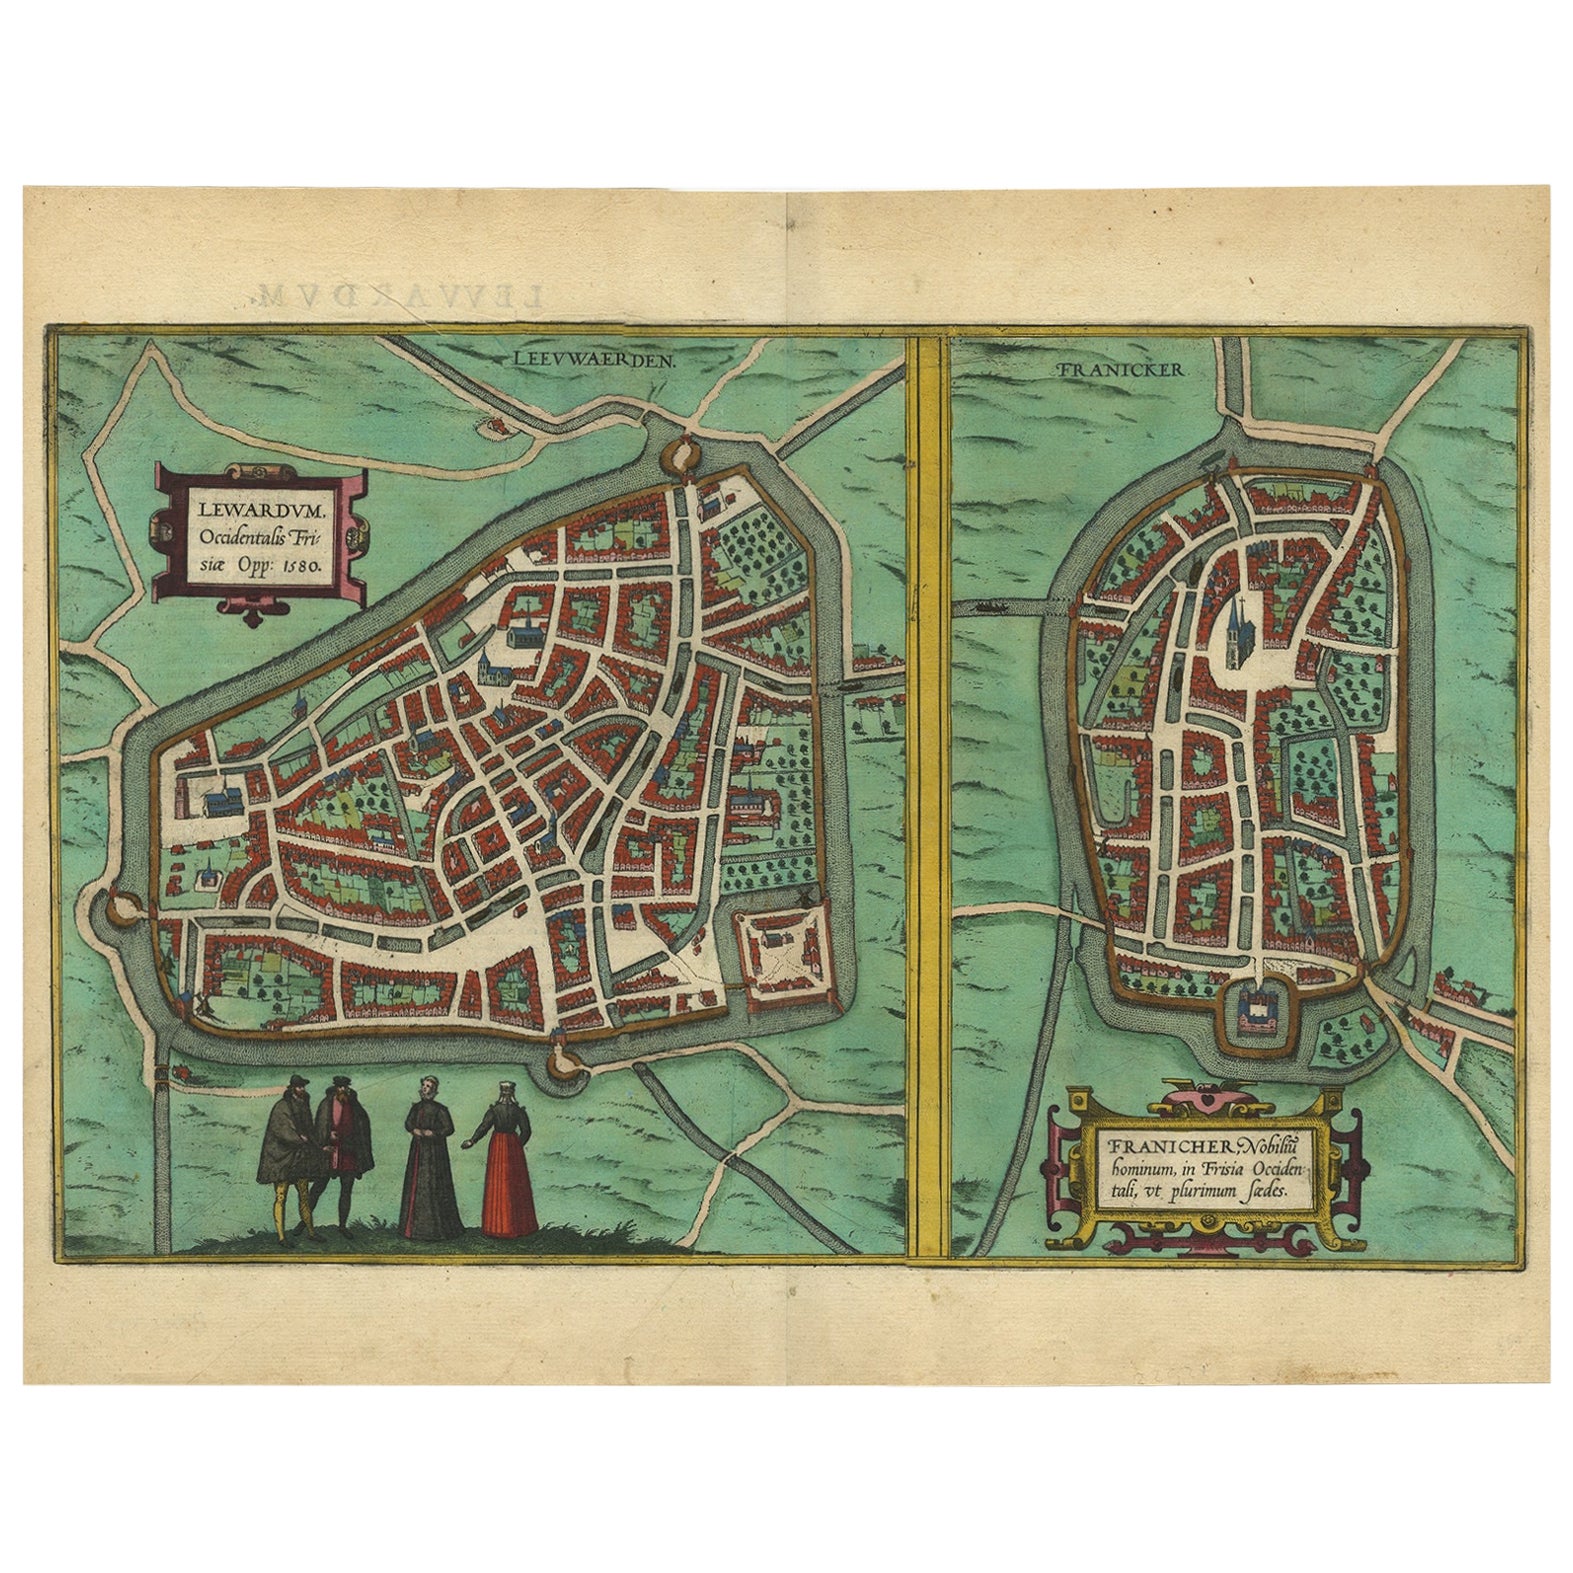 Antique Map of The Frisian Cities Leeuwarden and Franeker in Friesland, 1580